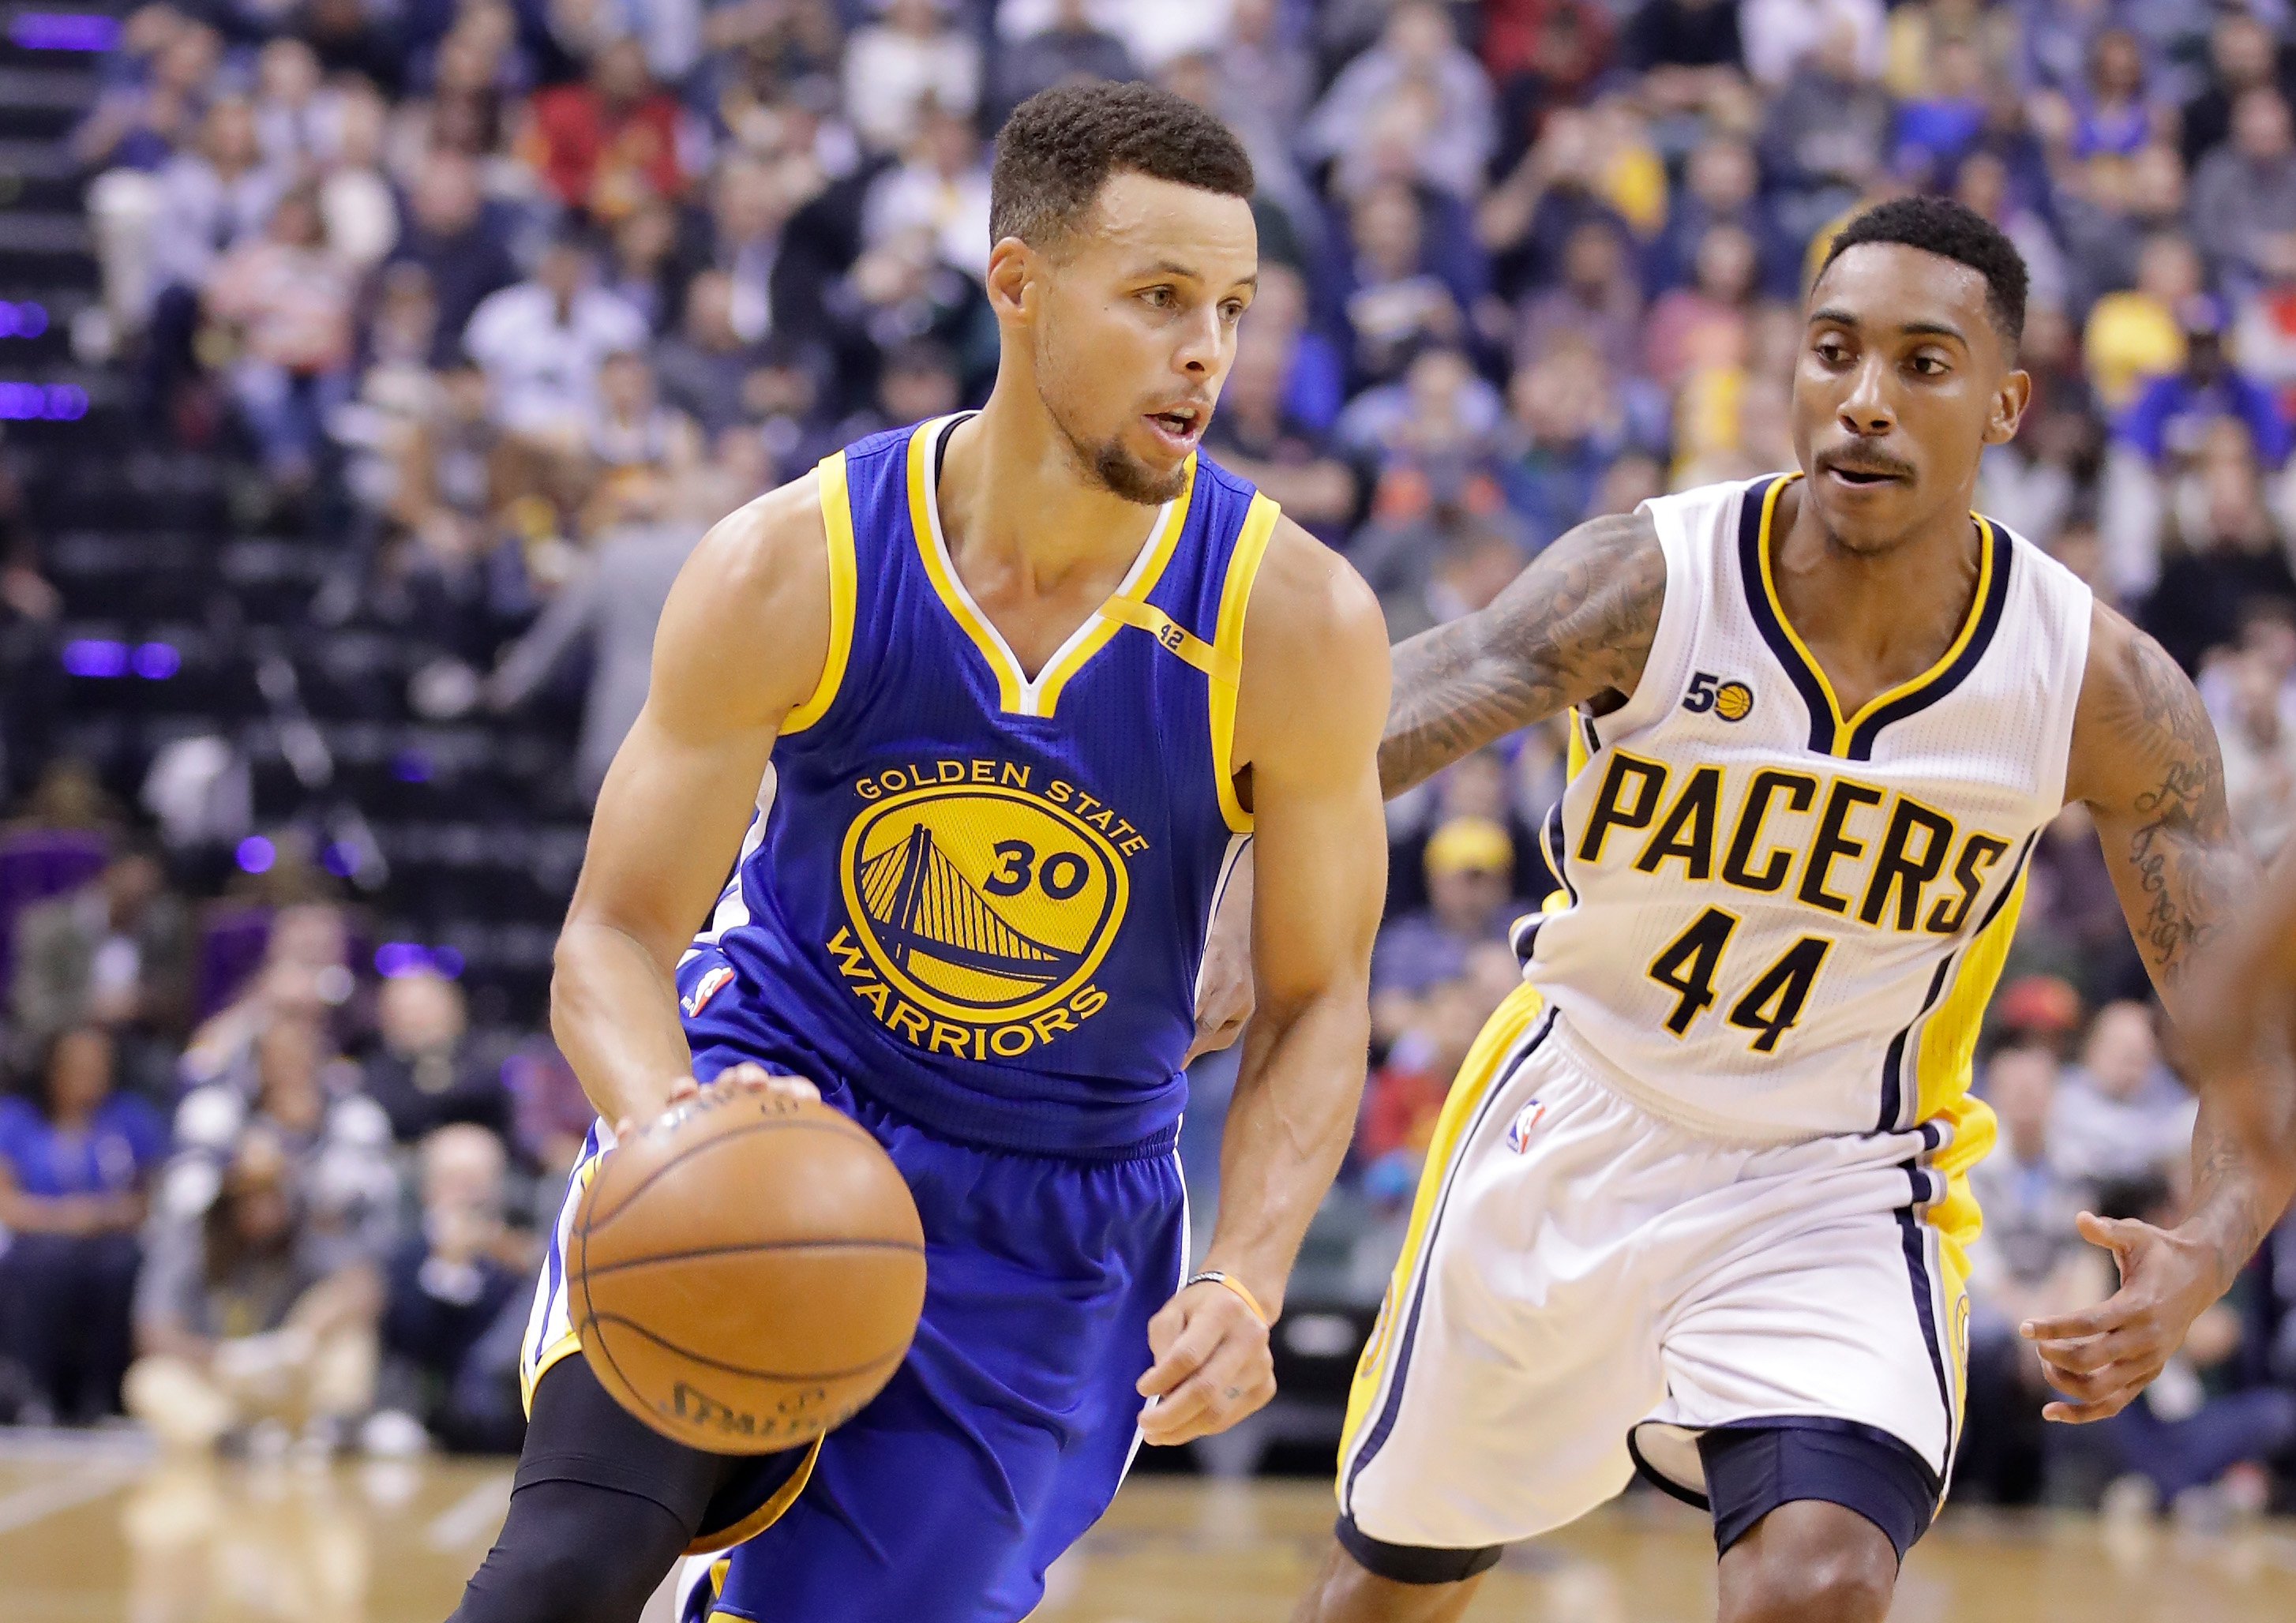 INDIANAPOLIS, IN - NOVEMBER 21: Stephen Curry #30 of the Golden State Warriors dribbles the ball during the game against the Indiana Pacers at Bankers Life Fieldhouse on November 21, 2016 in Indianapolis, Indiana. NOTE TO USER: User expressly acknowledges and agrees that, by downloading and or using this photograph, User is consenting to the terms and conditions of the Getty Images License Agreement   Andy Lyons/Getty Images/AFP